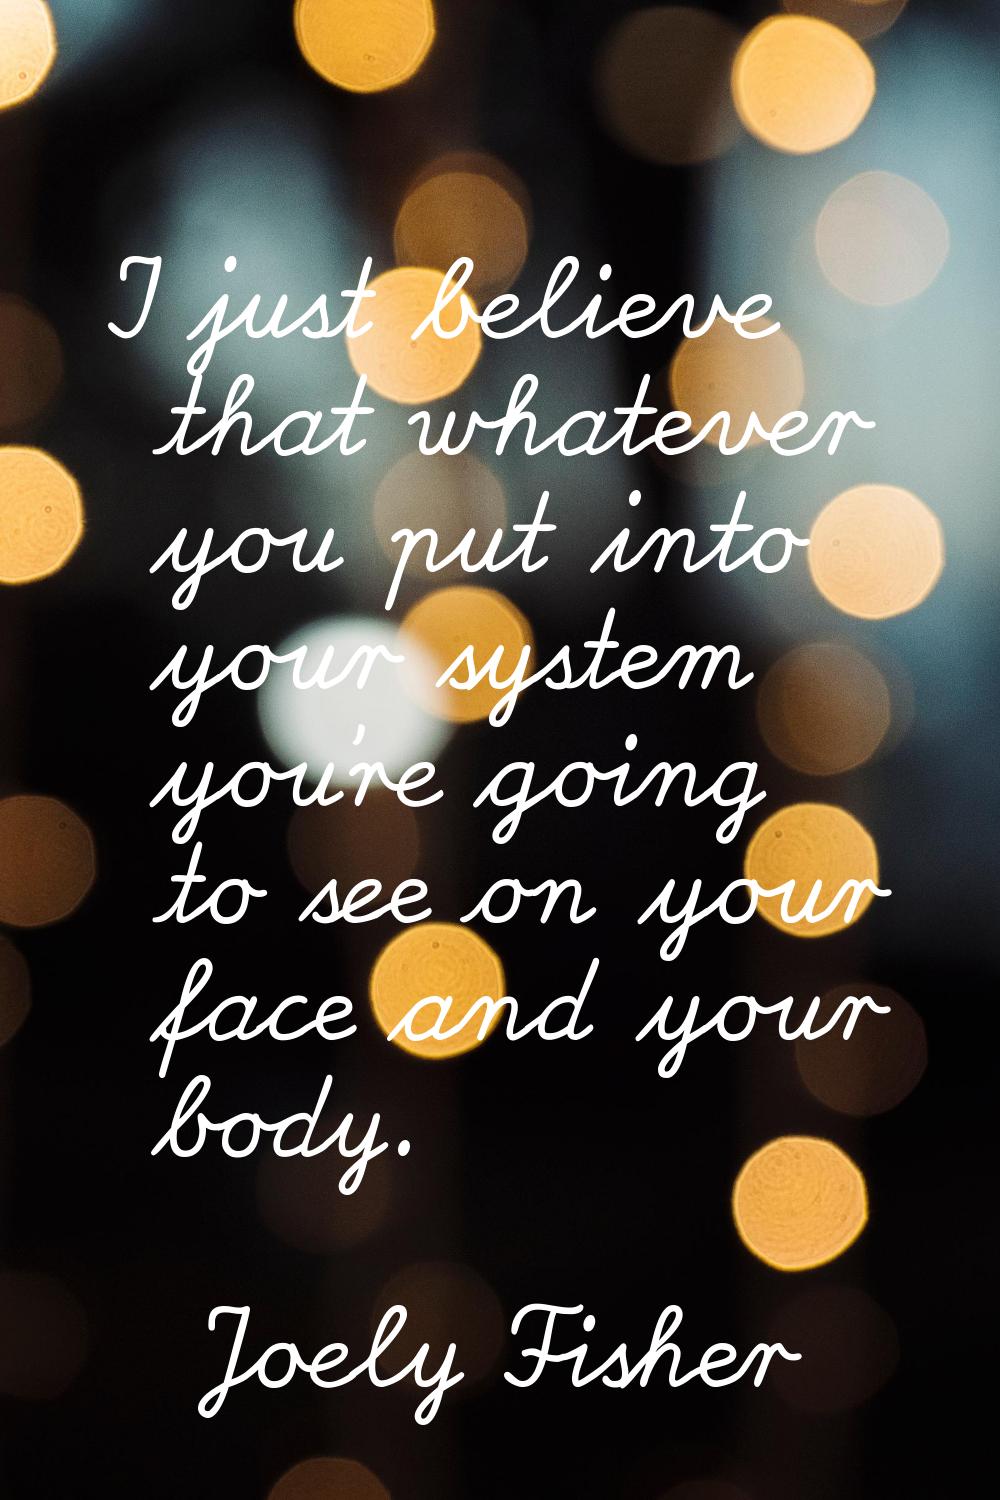 I just believe that whatever you put into your system you're going to see on your face and your bod